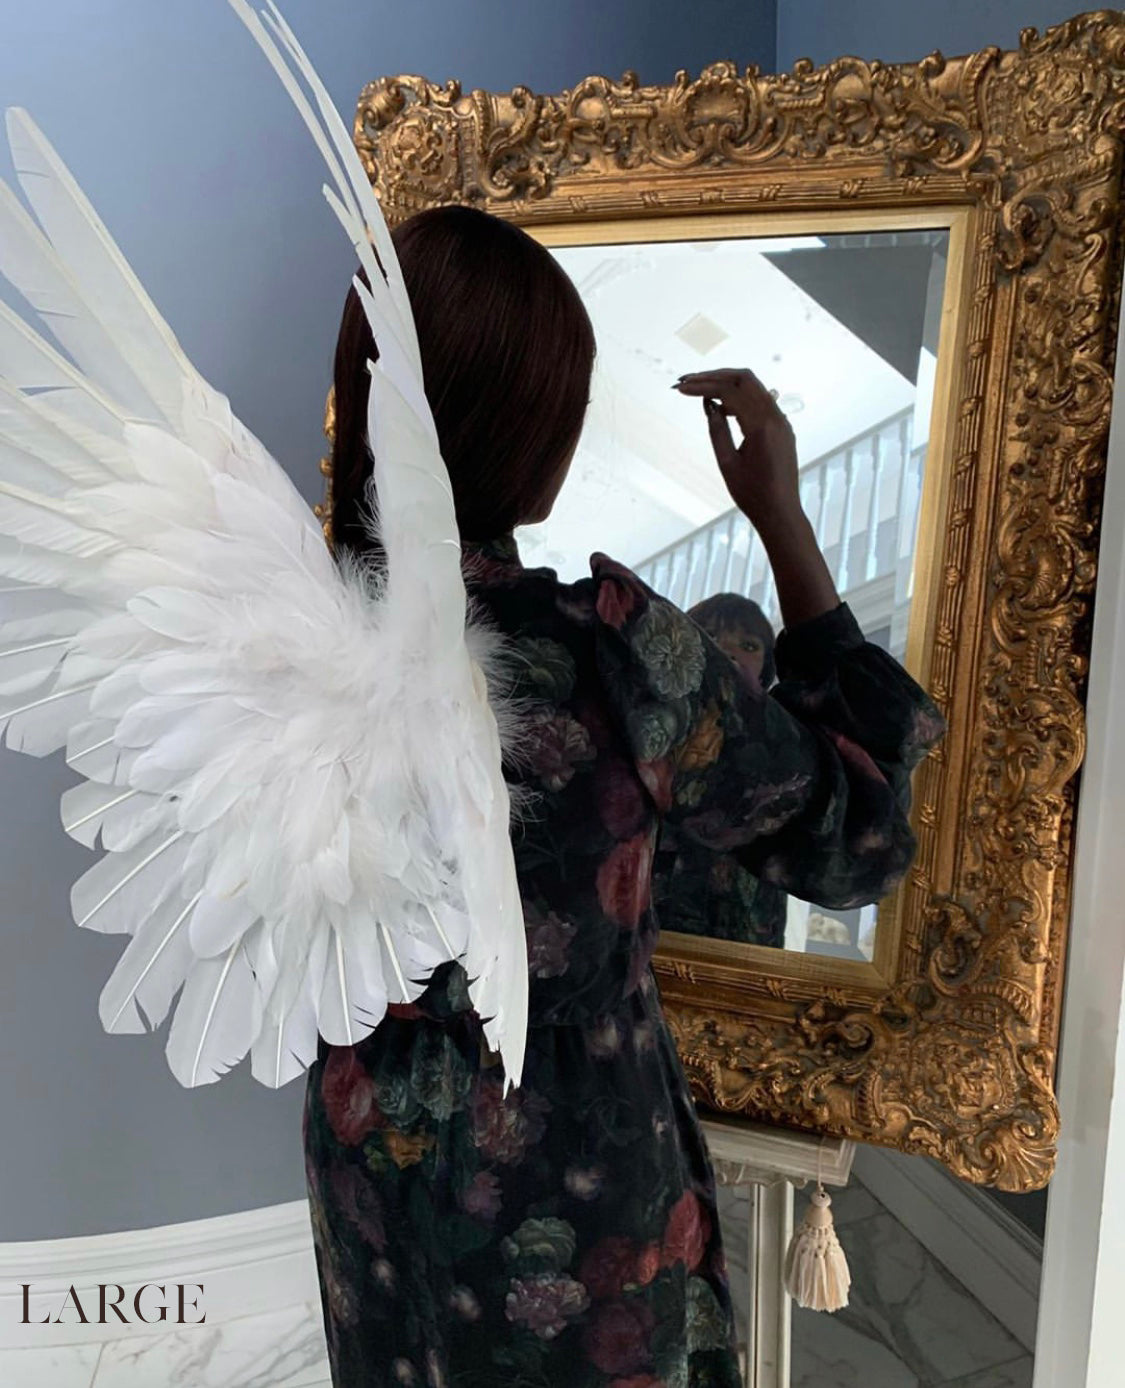 Designer Made Floating Wings with Gilded Tips